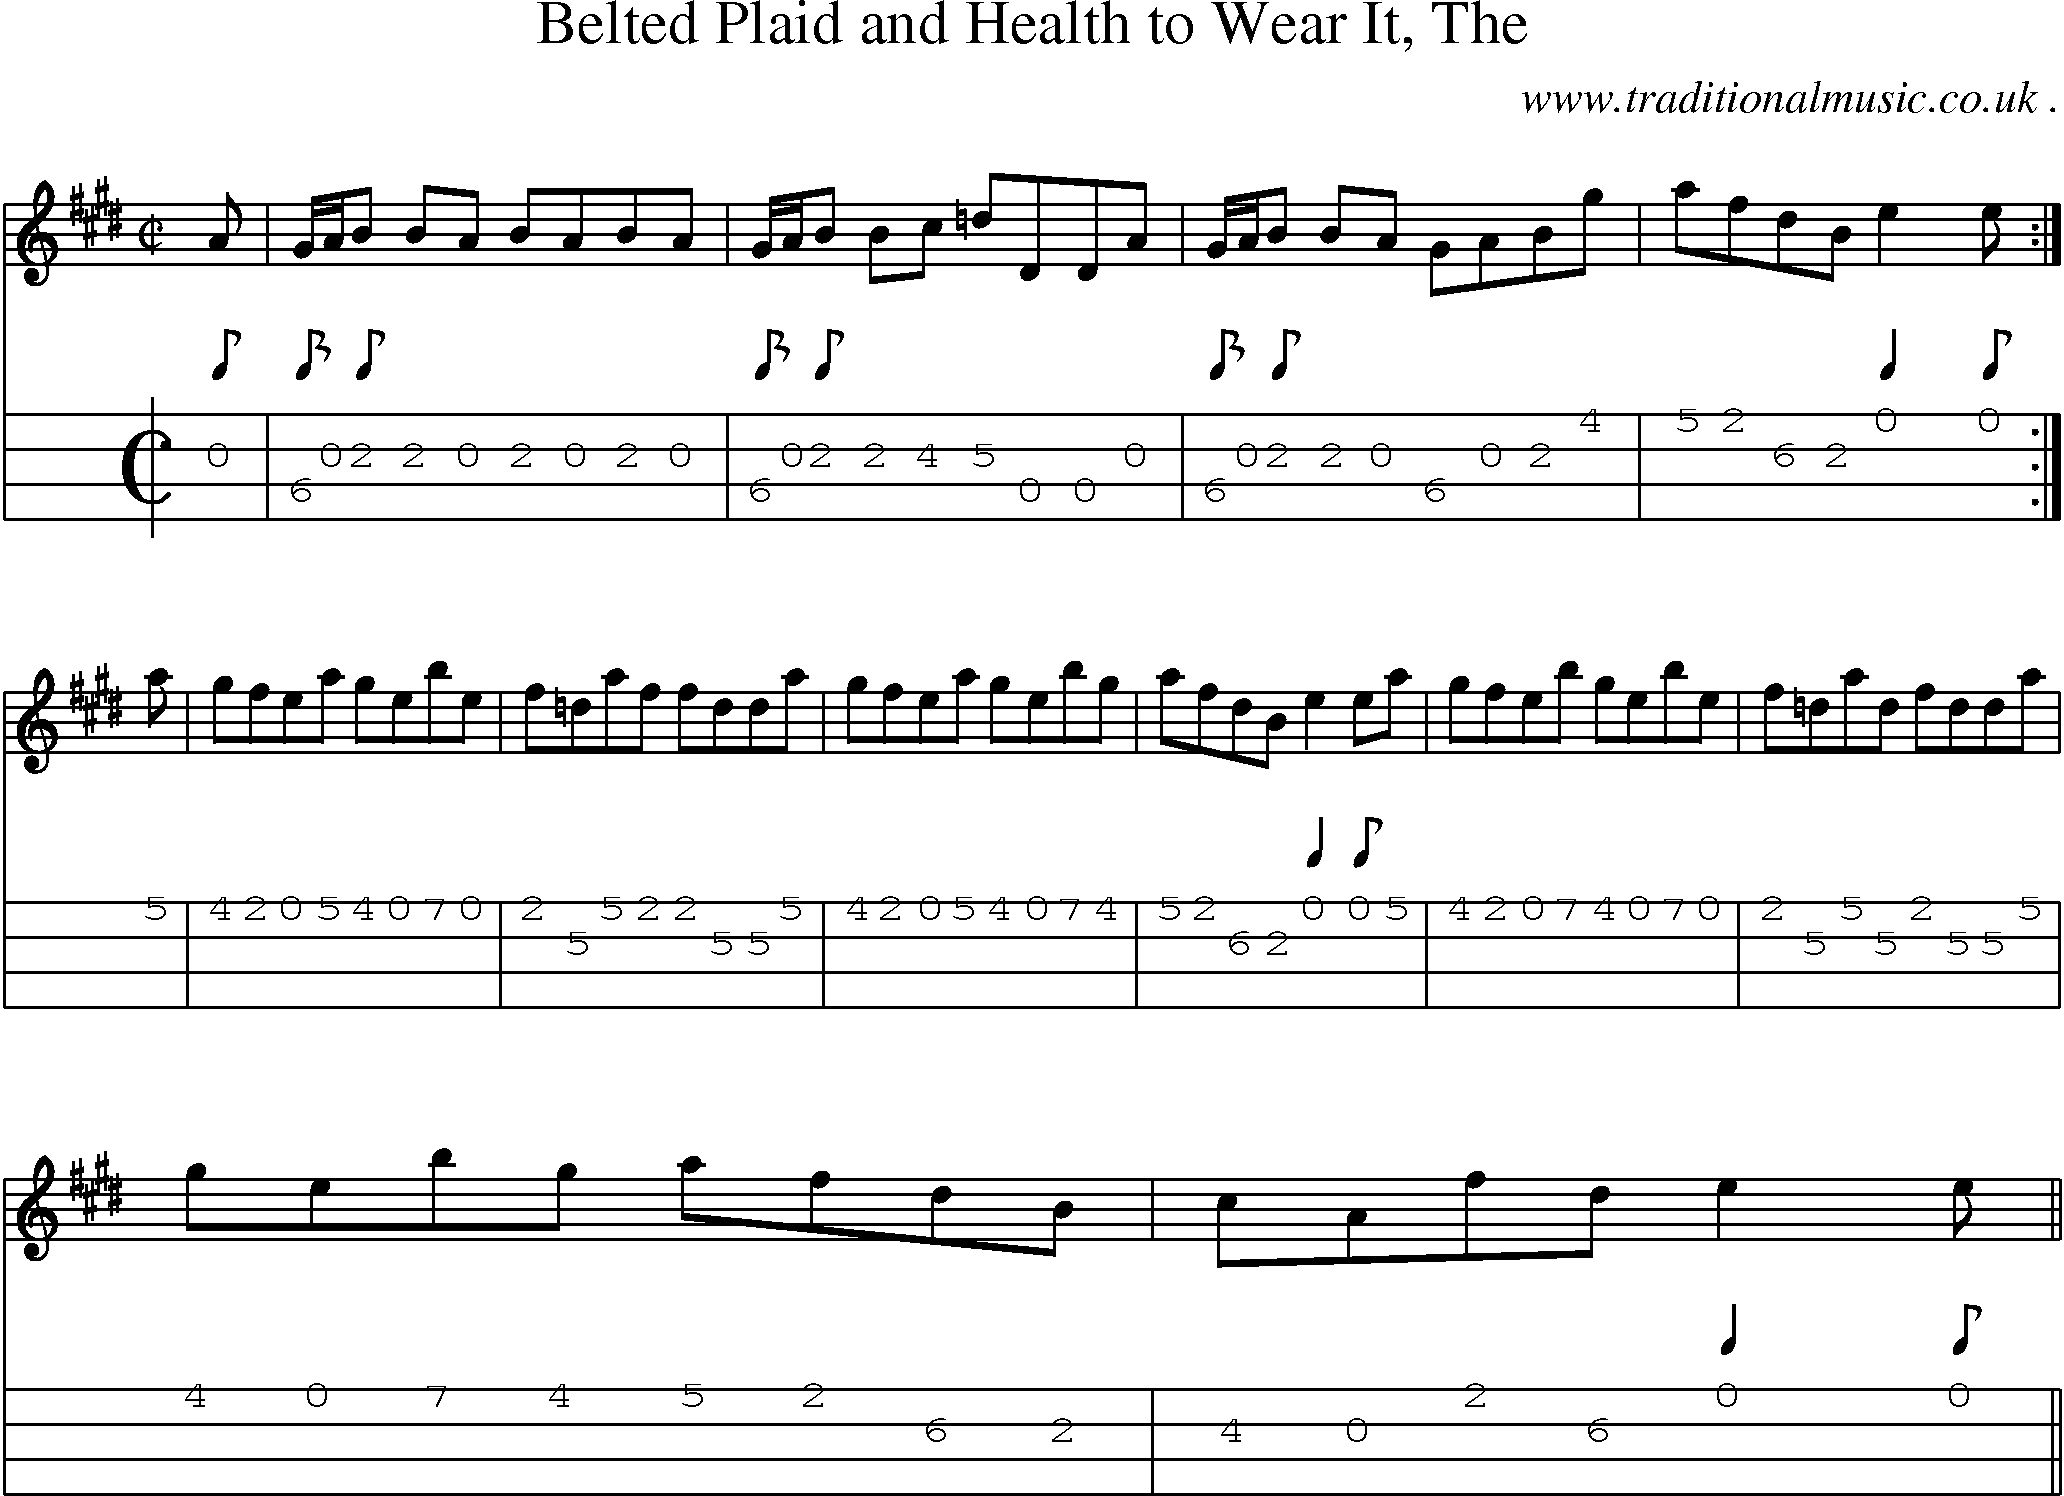 Sheet-music  score, Chords and Mandolin Tabs for Belted Plaid And Health To Wear It The